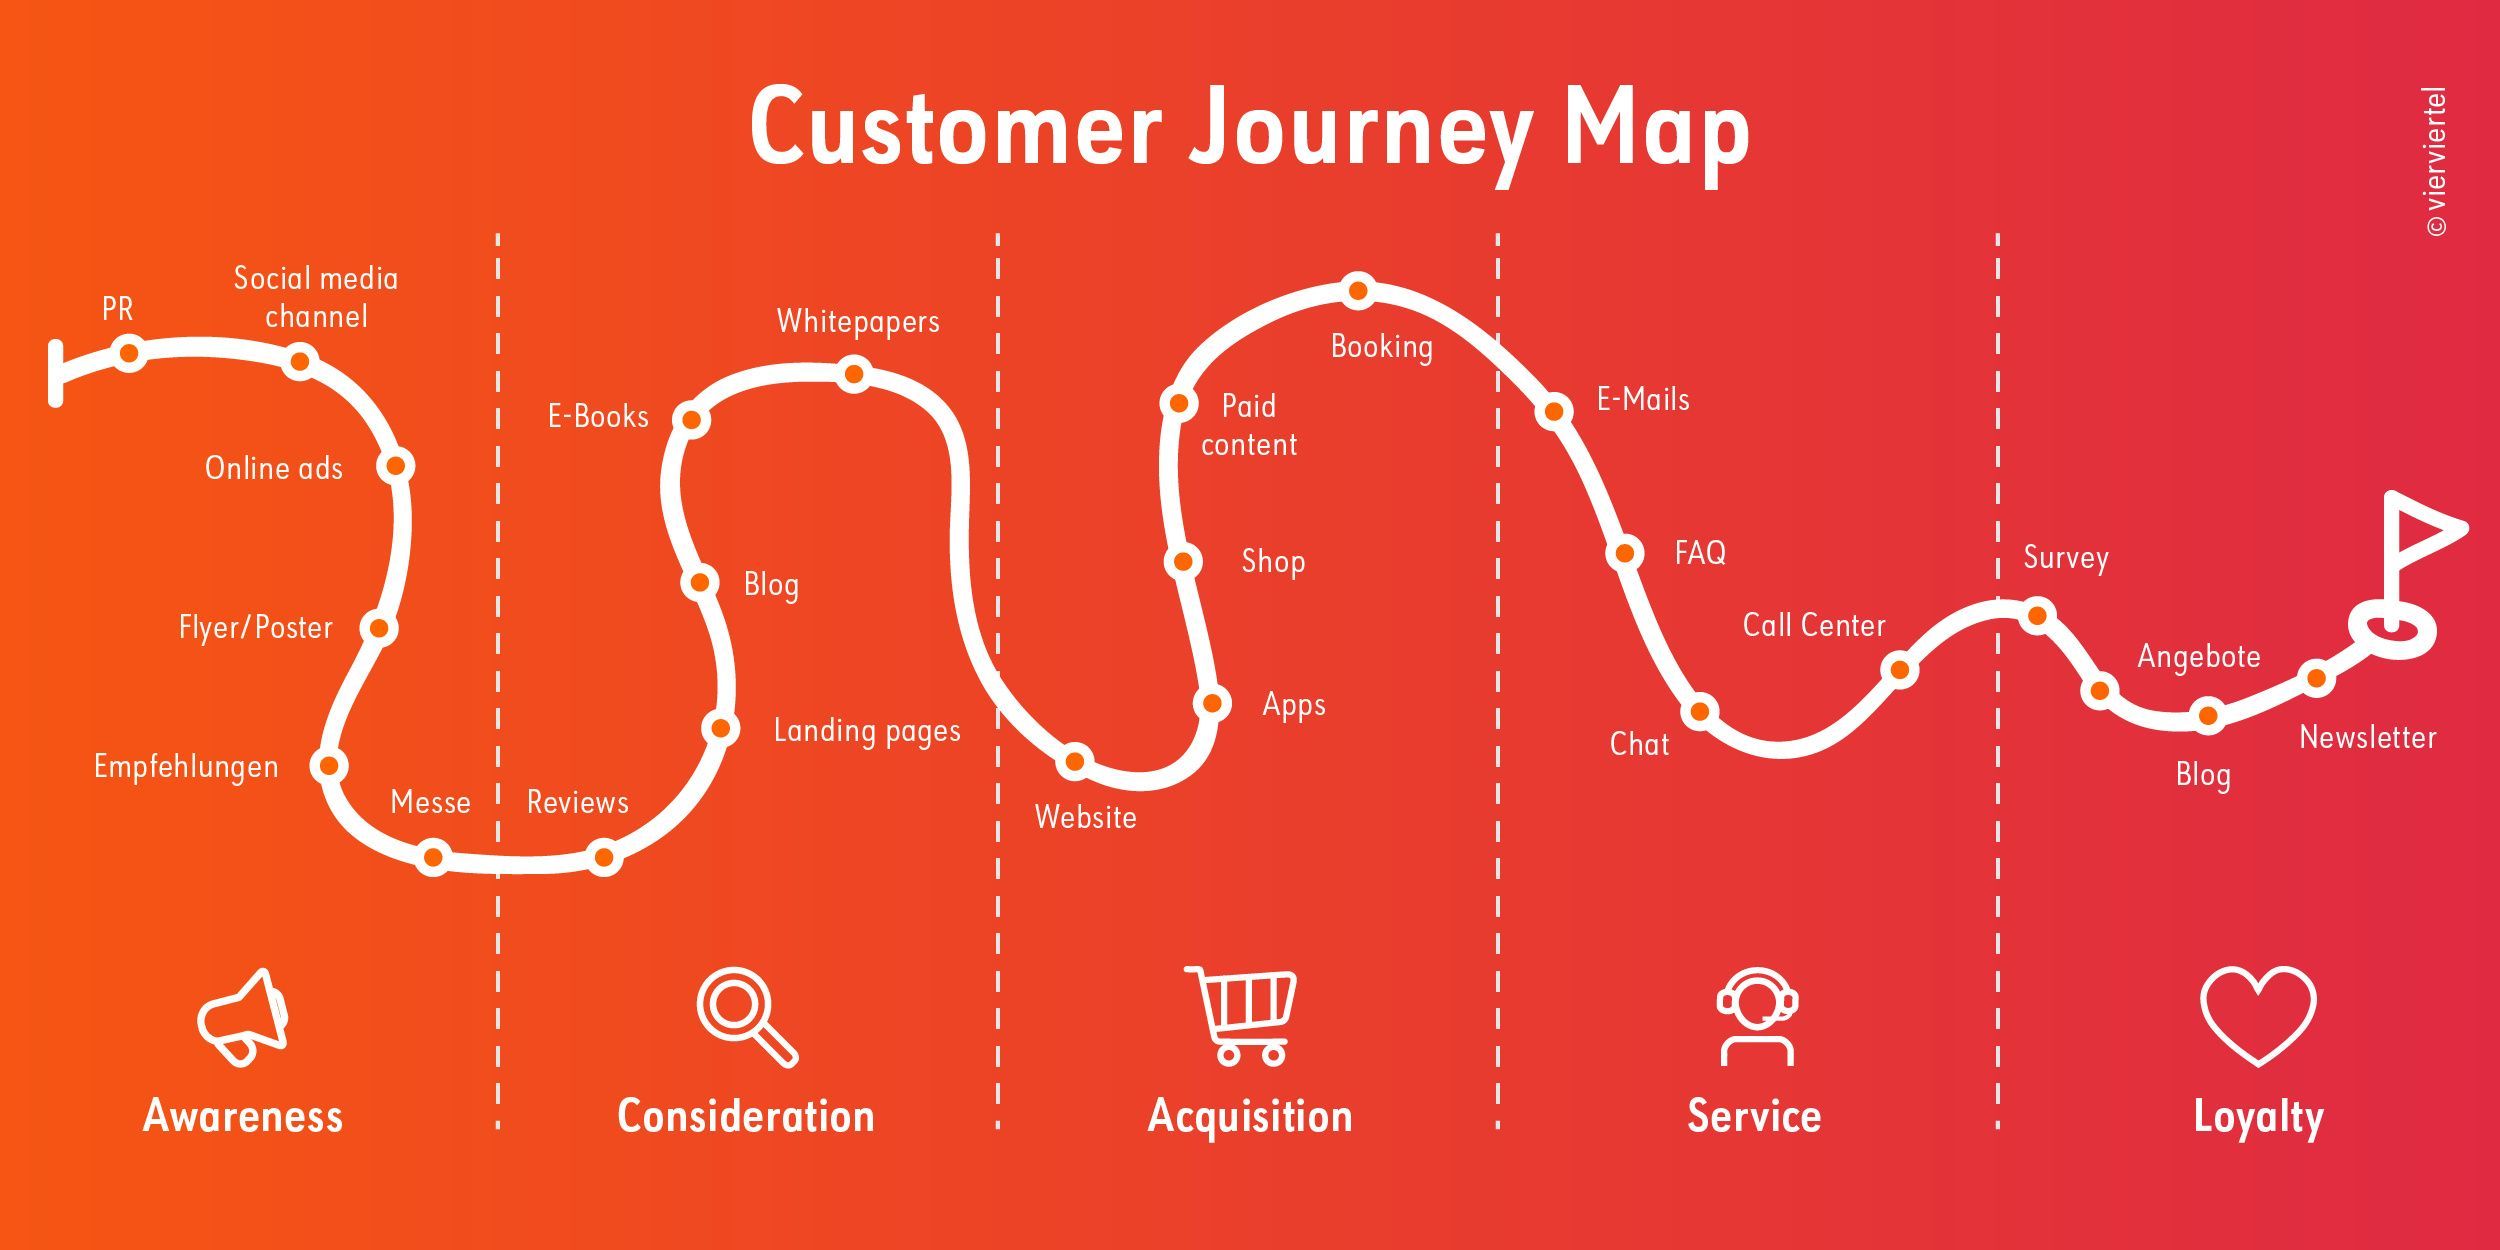 How to Optimize a Digital Customer Journey?